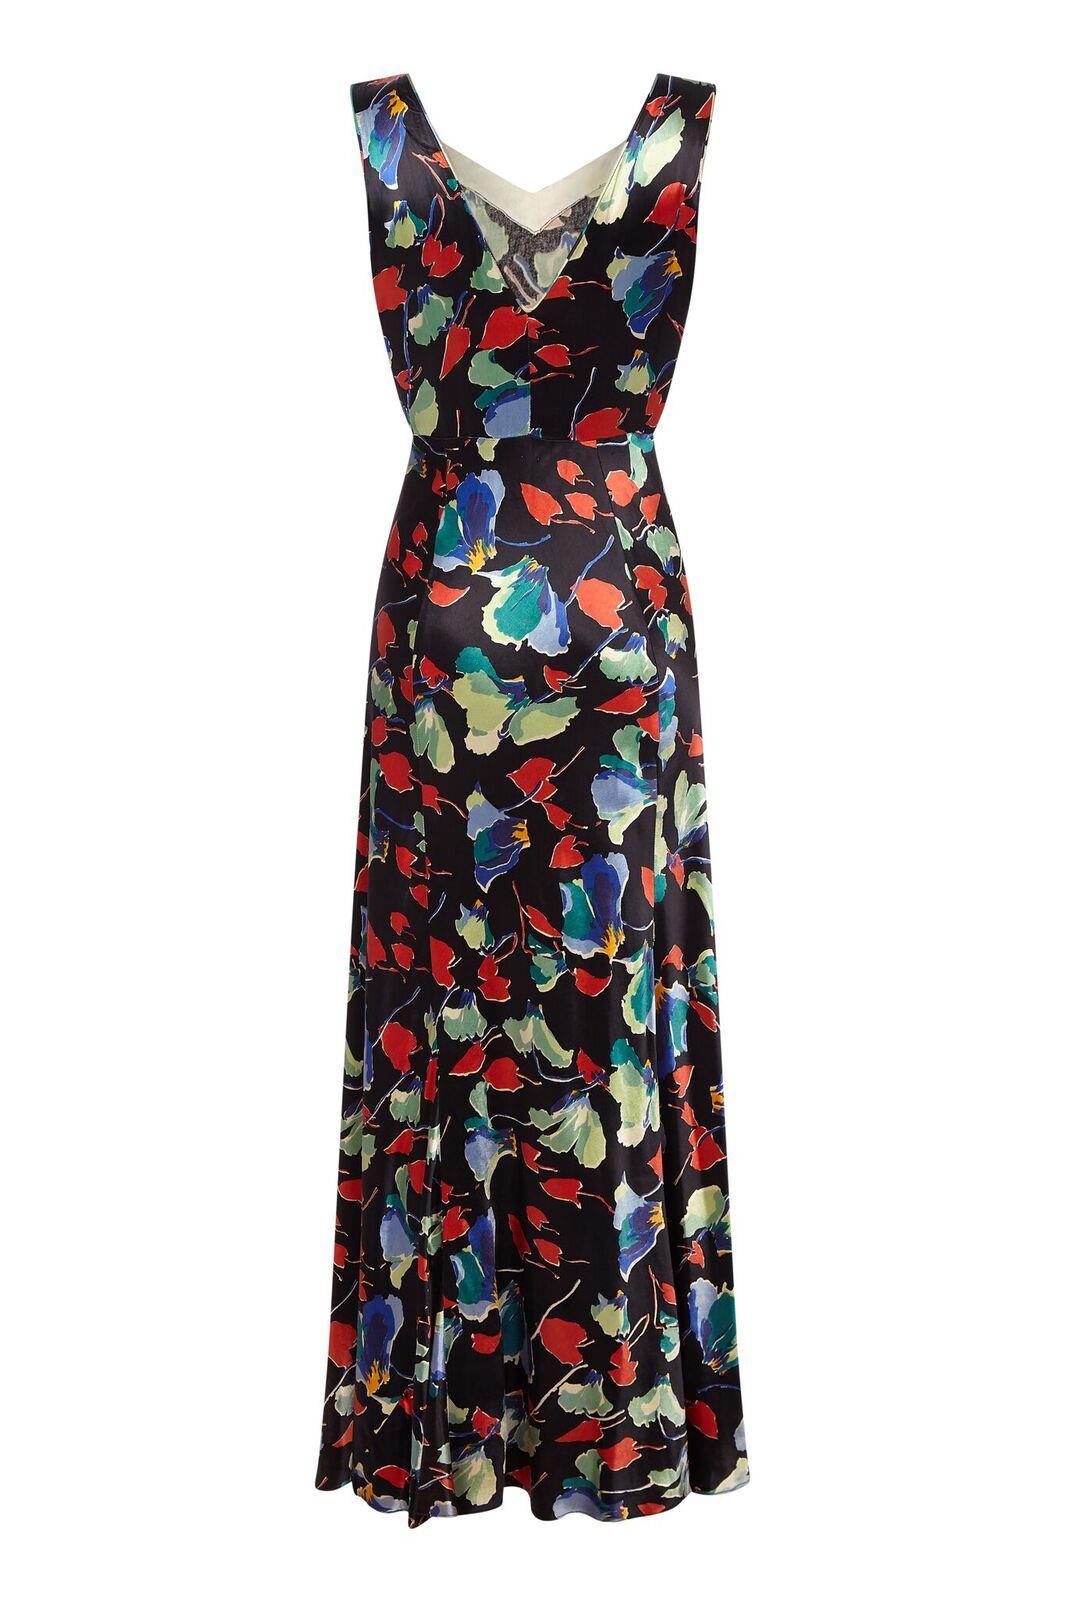 This divine 1930s liquid satin bias cut gown is in such extraordinary vintage condition it is hard to believe it is of this era. The colours of abstracted floral print are still absolutely luminous and dance across the black background in crimson,